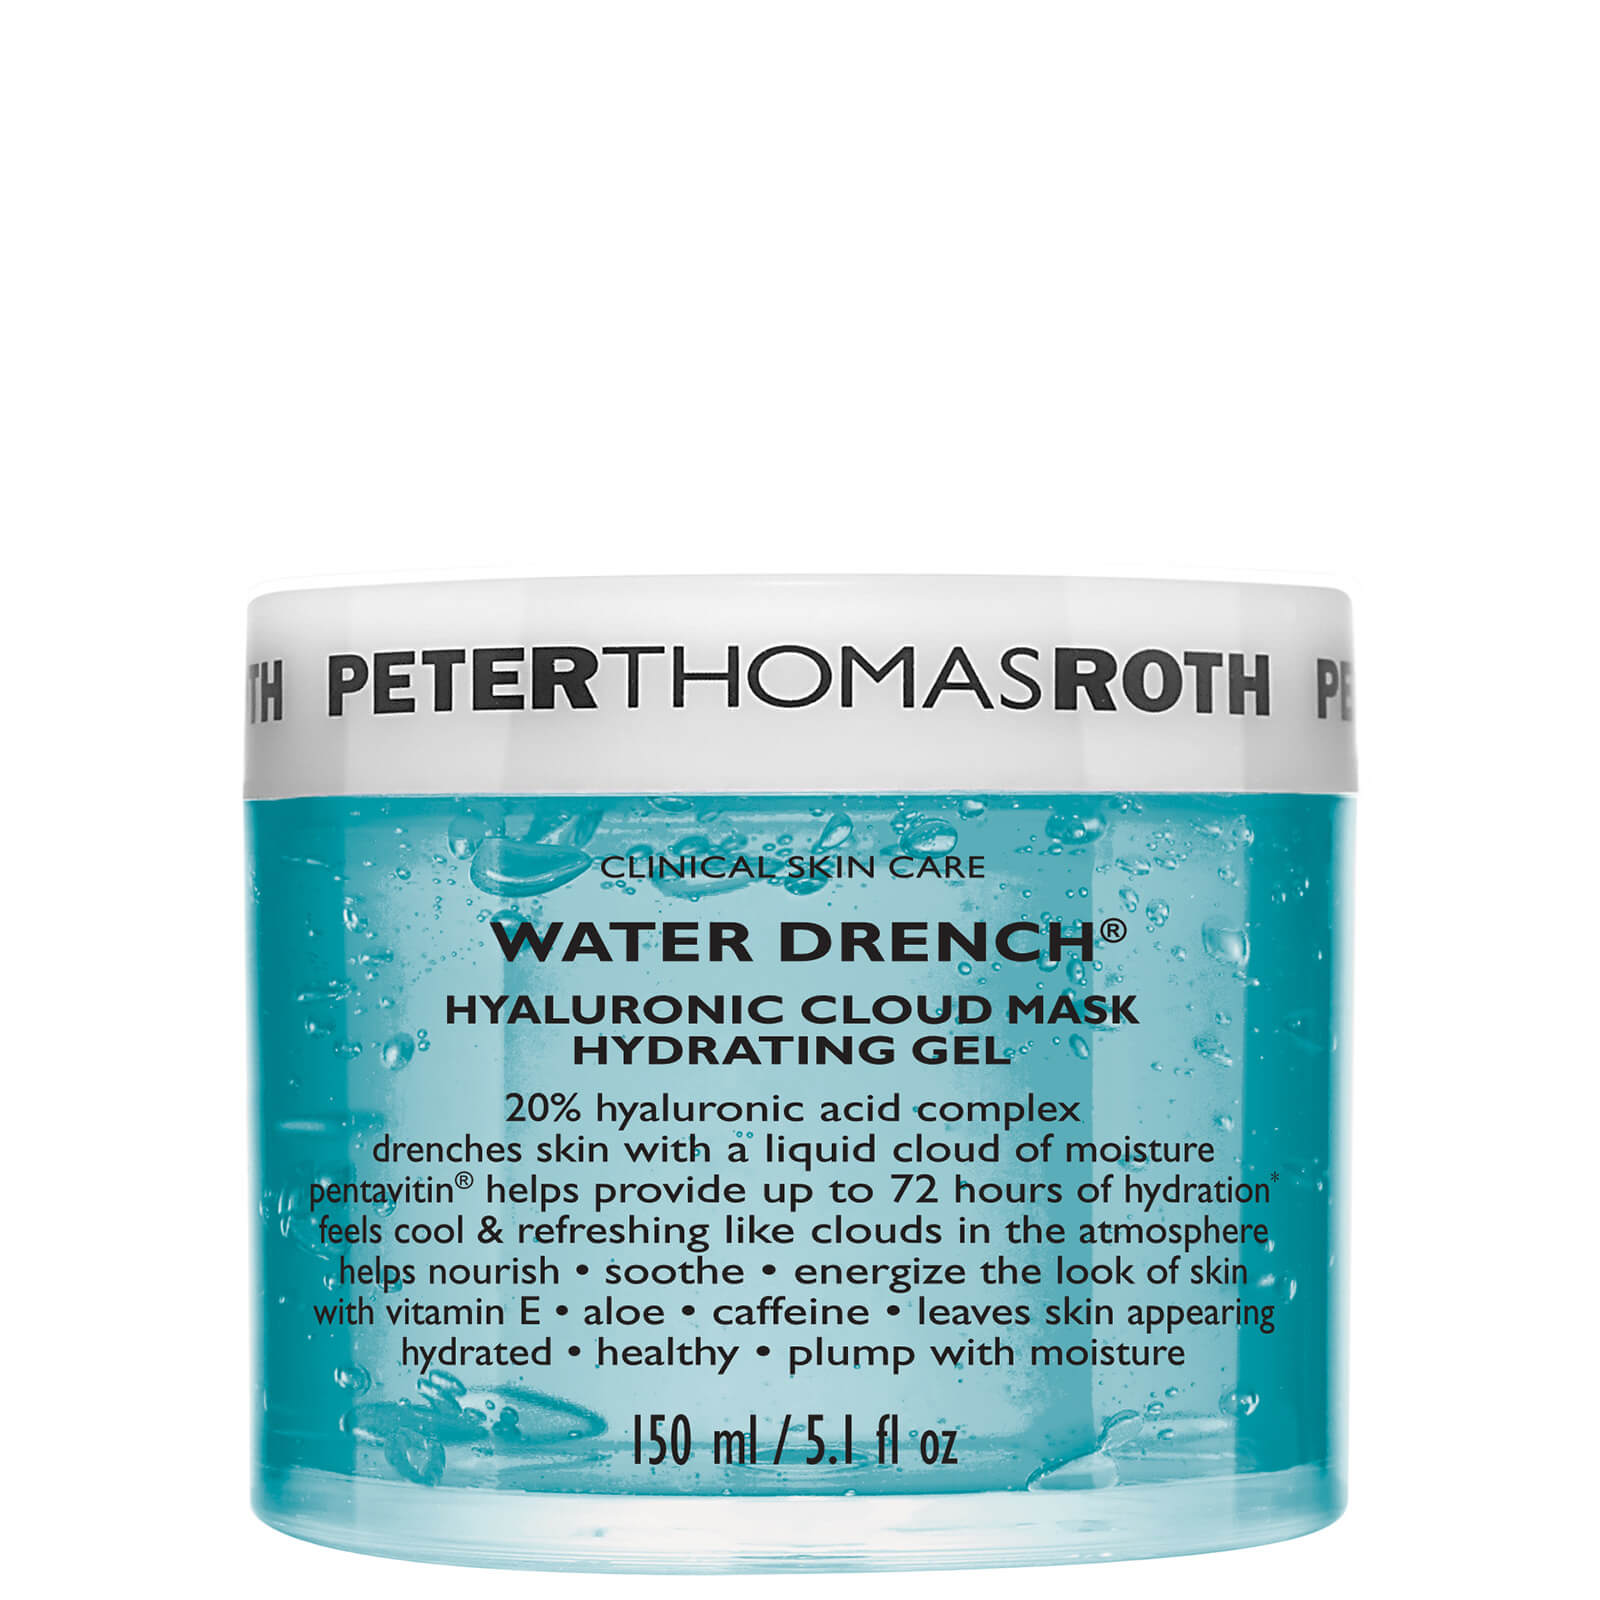 Peter Thomas Roth Water Drench Hyaluronic Cloud Mask (Various Sizes) - 150ml